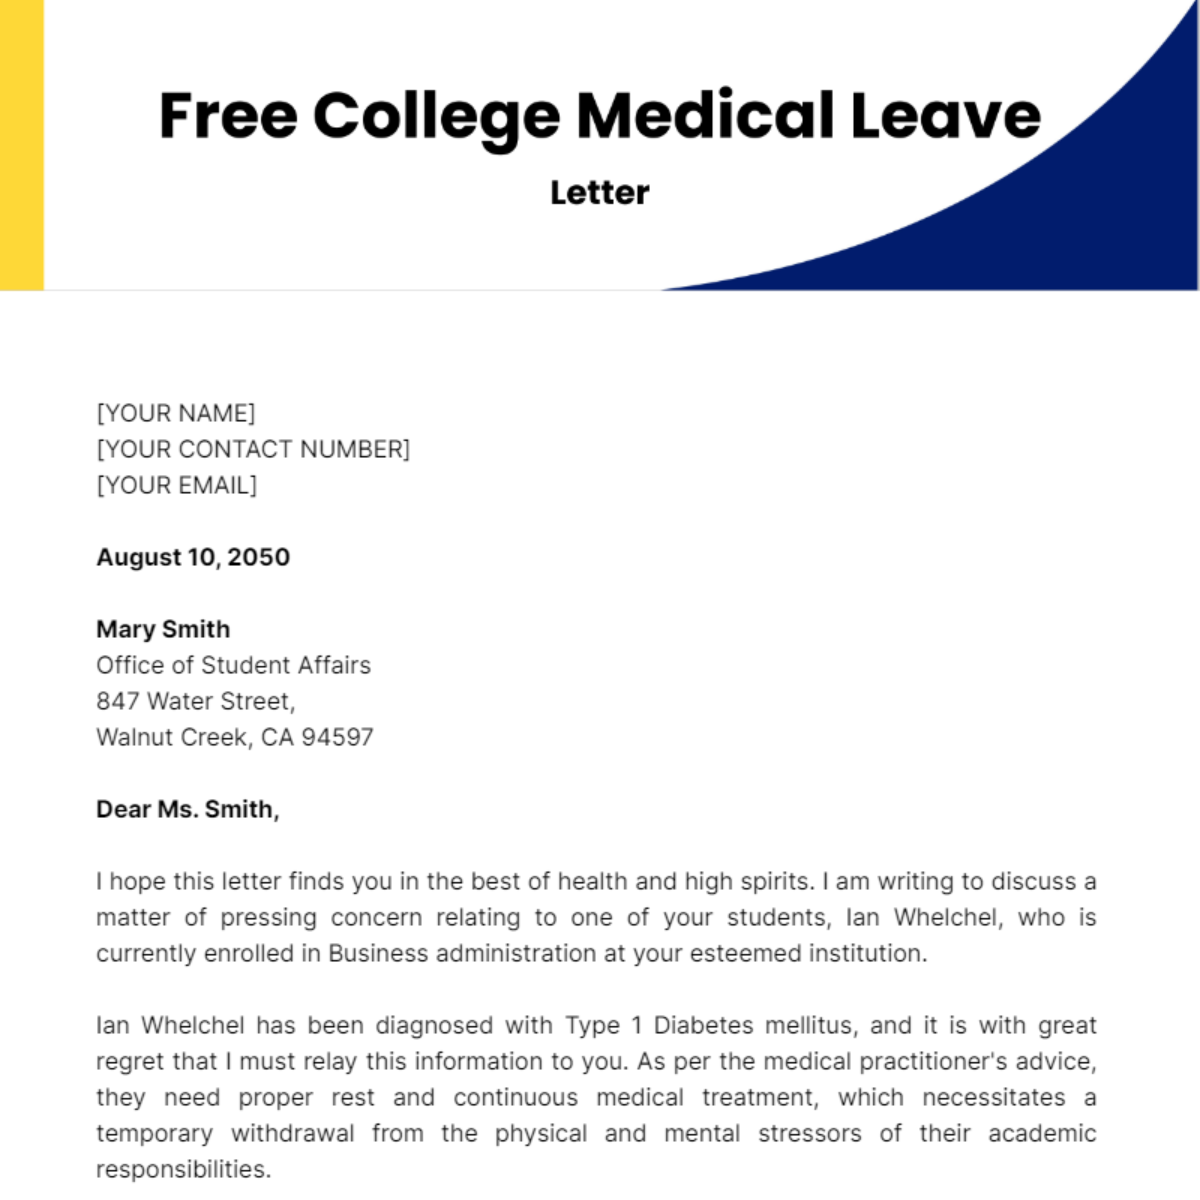 Free College Medical Leave Letter Template